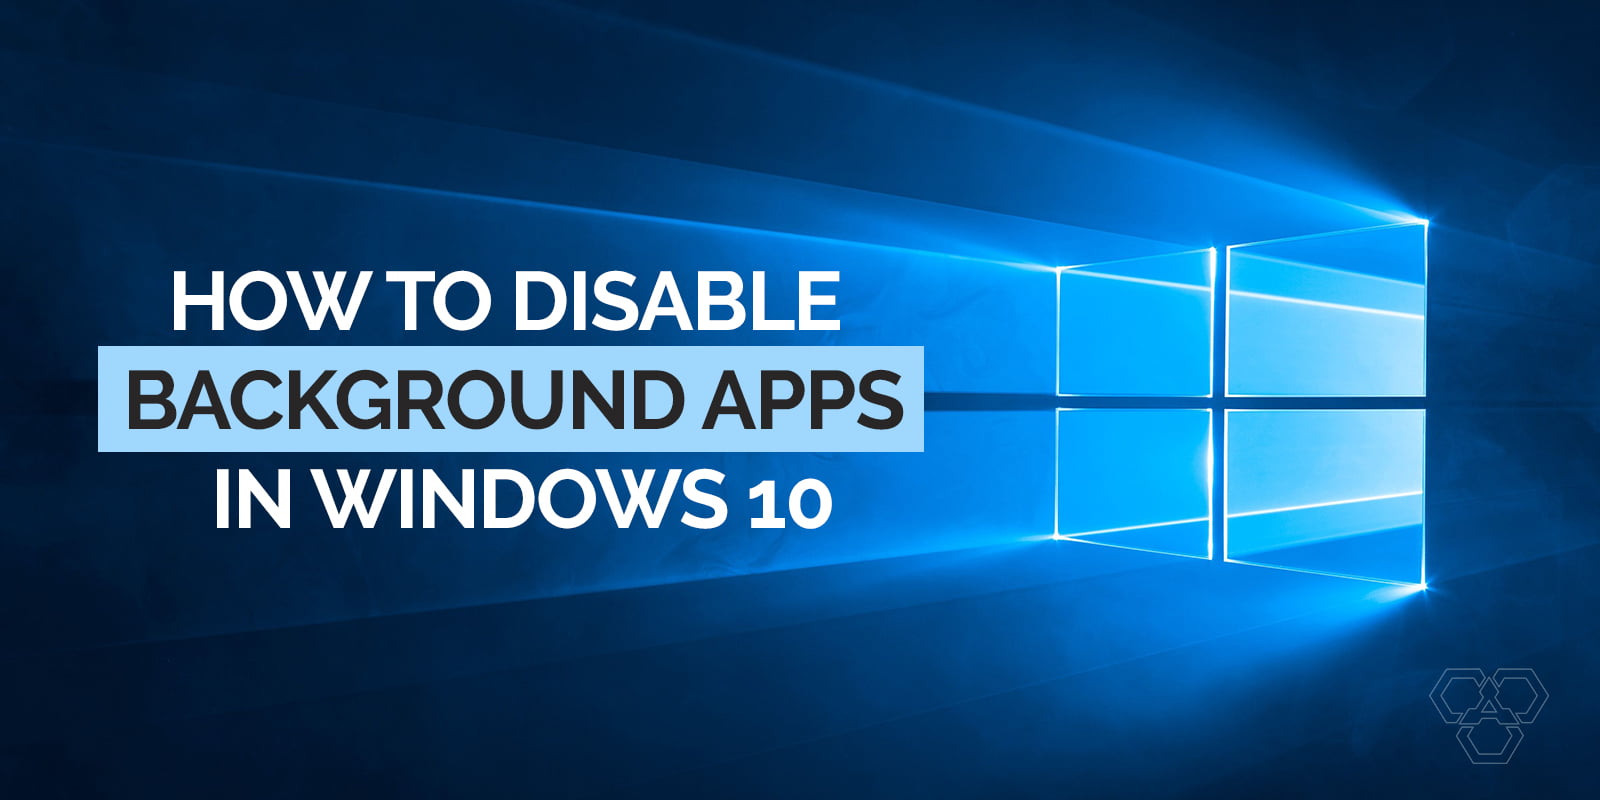 How To Disable Background Apps In Windows 10